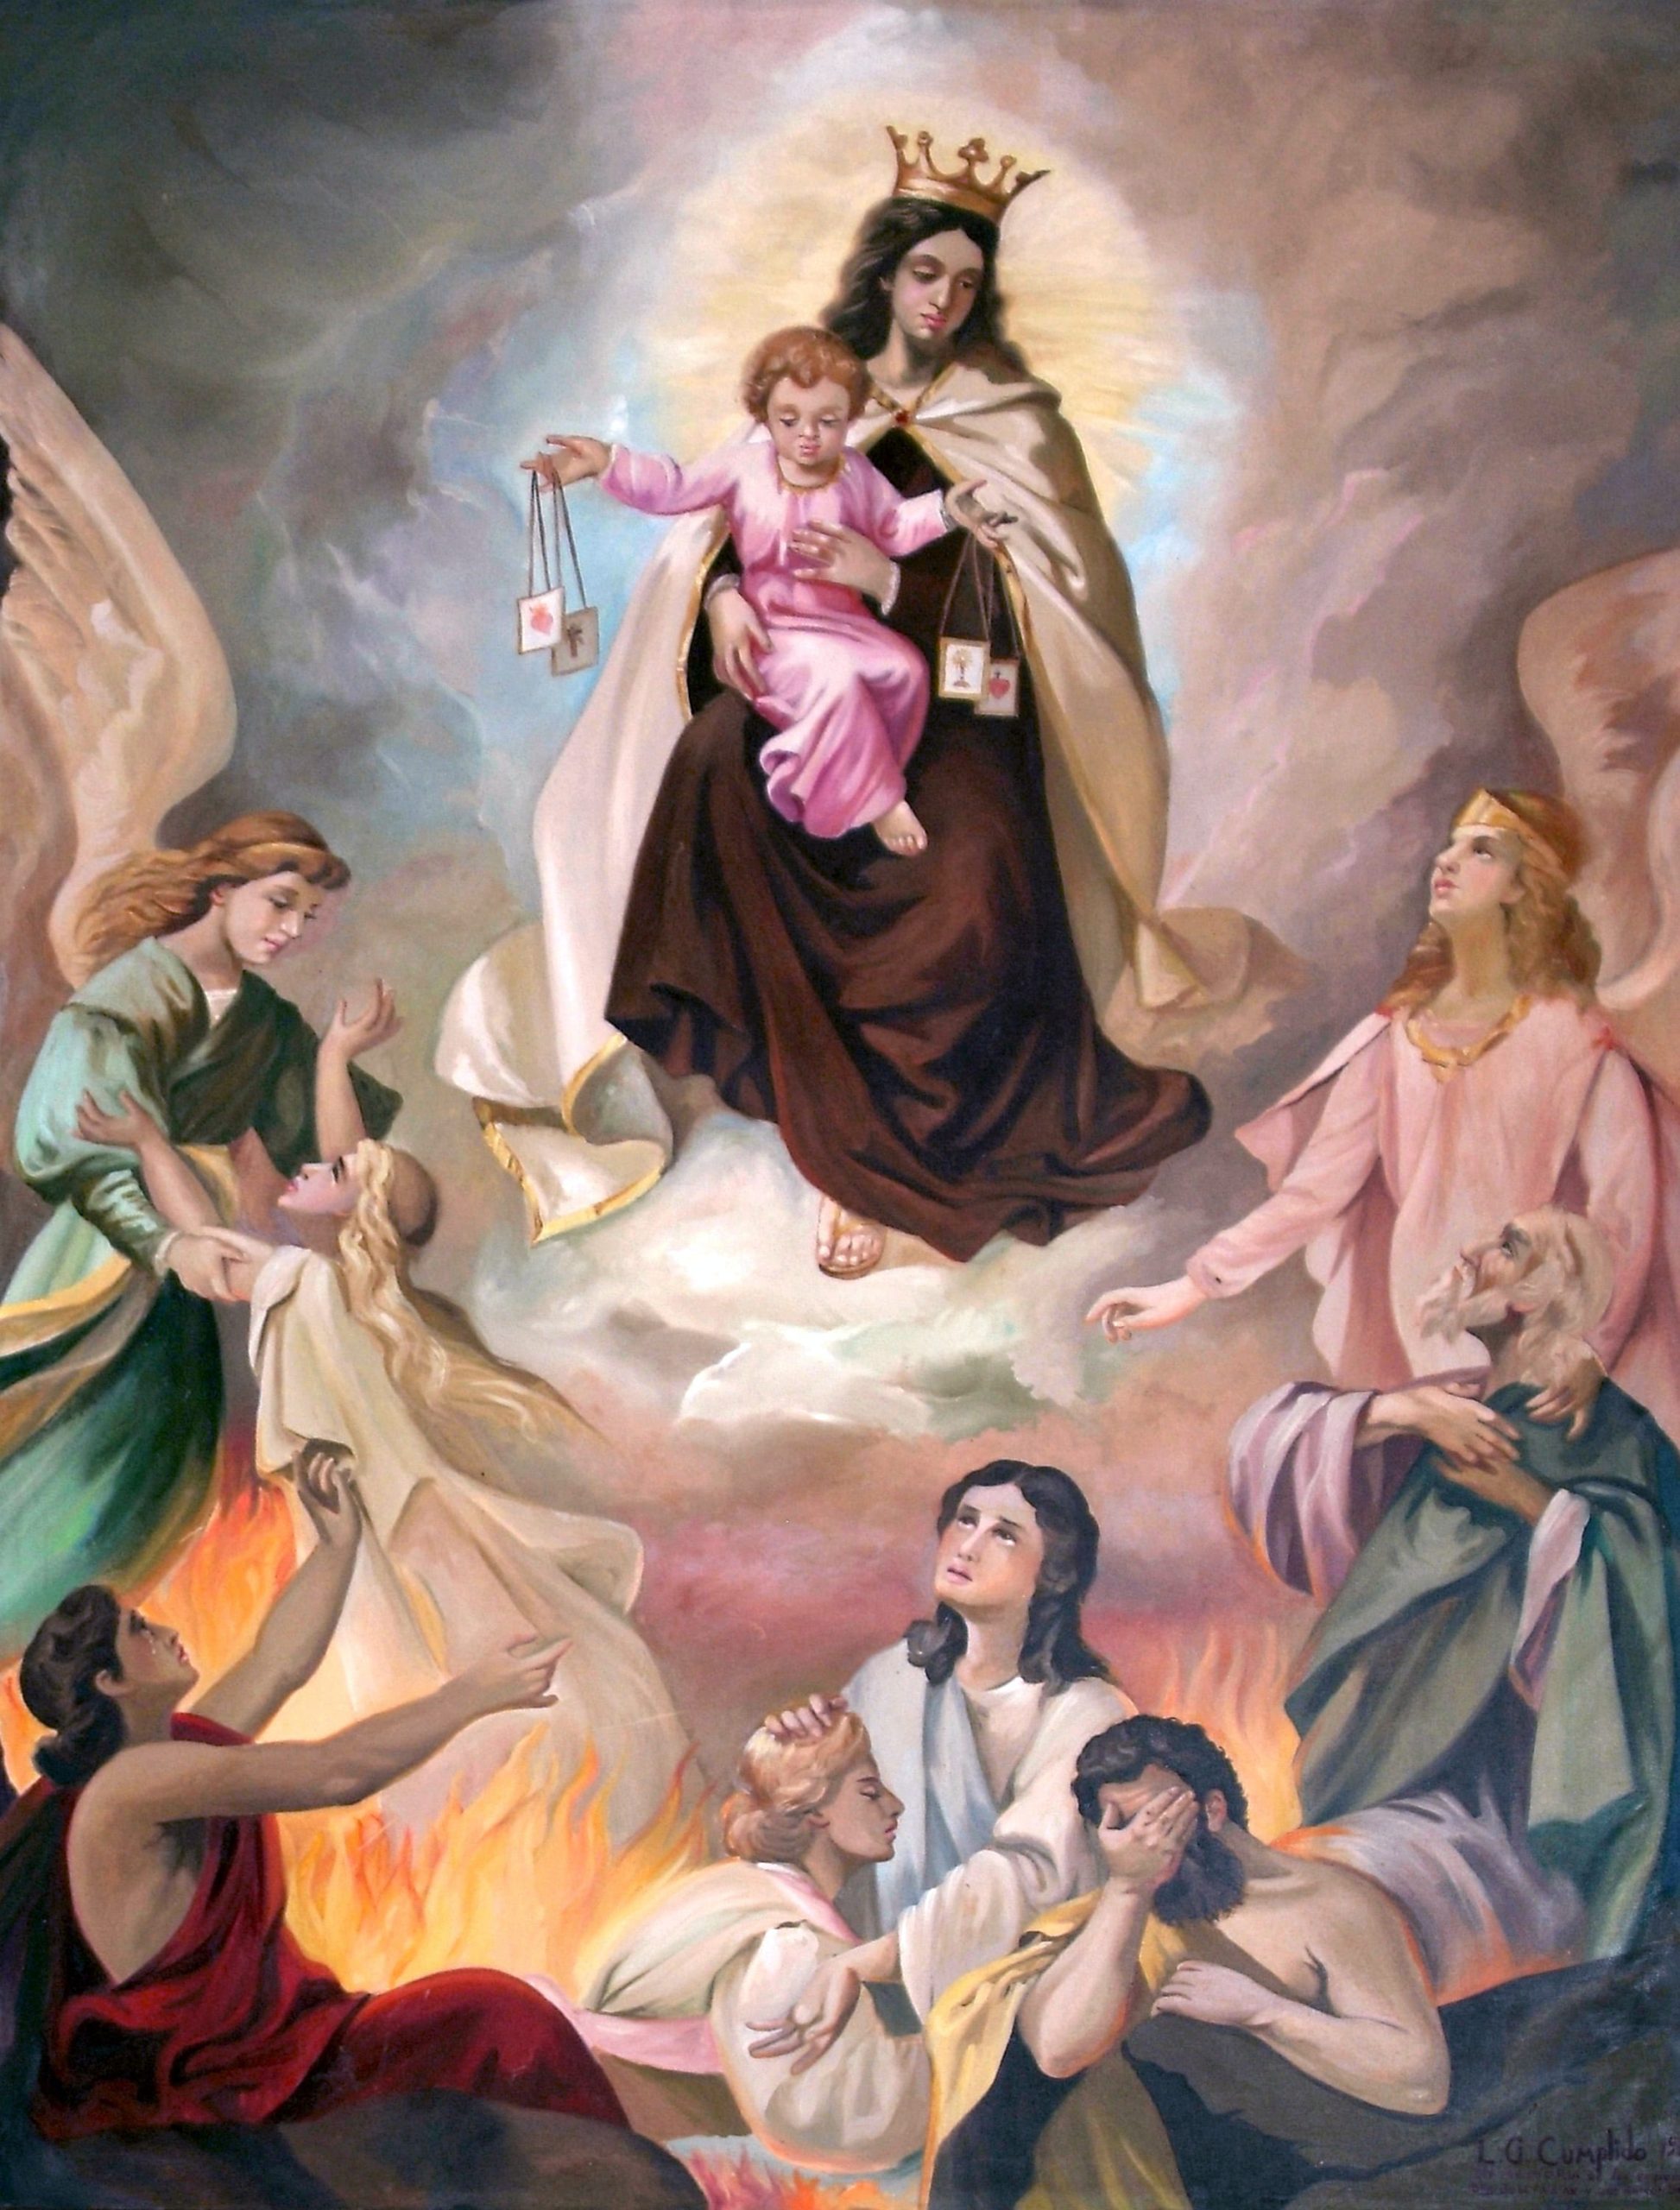 Prayer for the blessed souls in purgatory